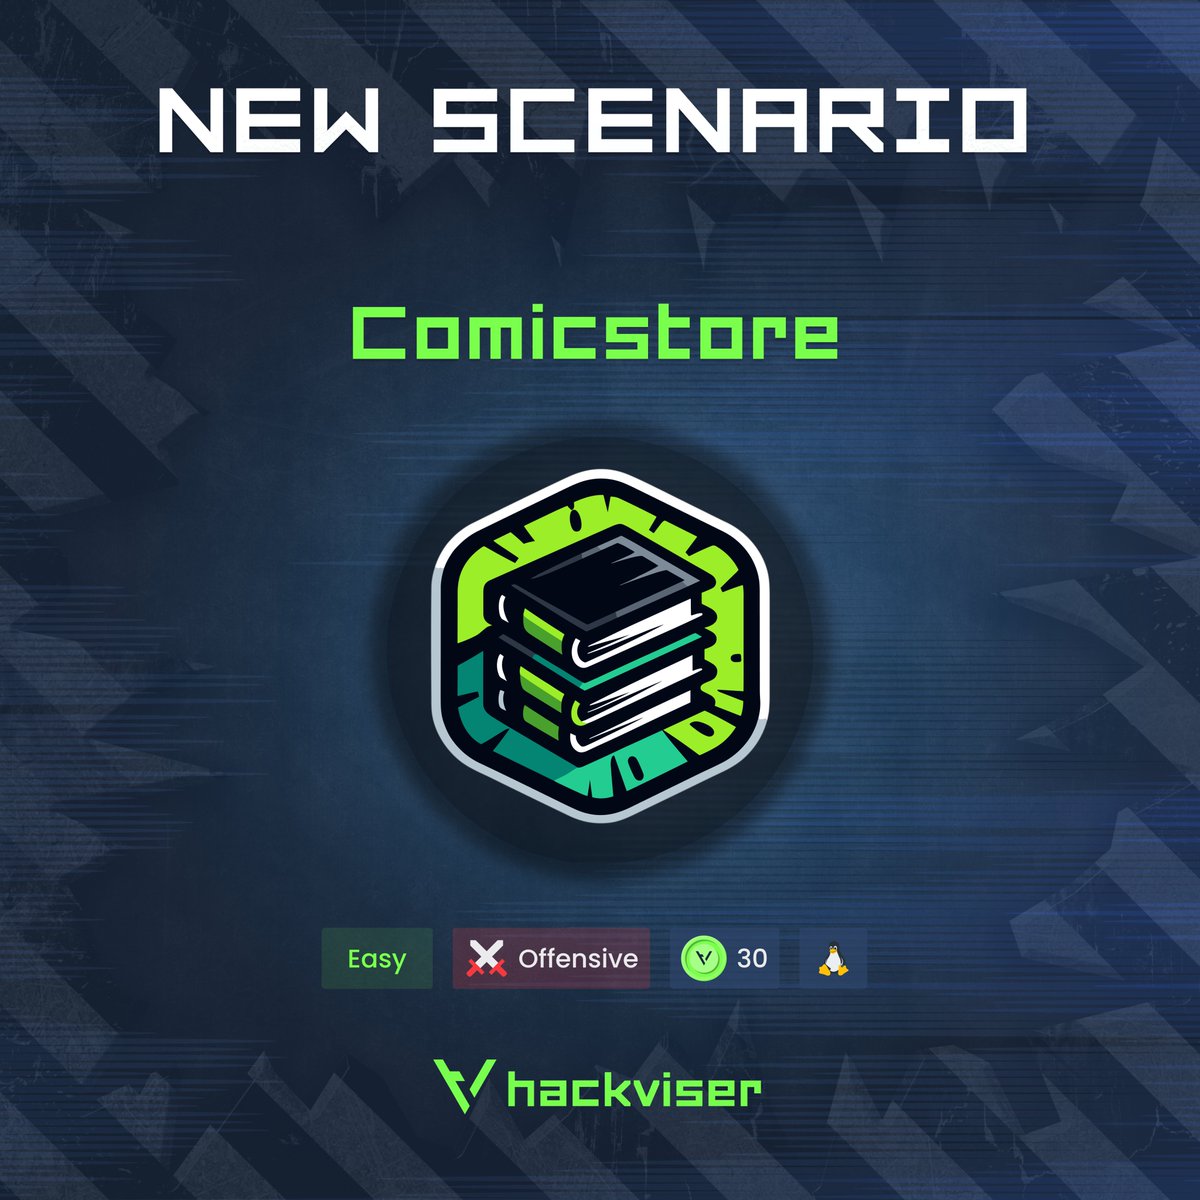 New offensive scenario released! 🔥

Go to Hackviser now for this exclusive experience!

#cybersecurity #cybersecuritytraining